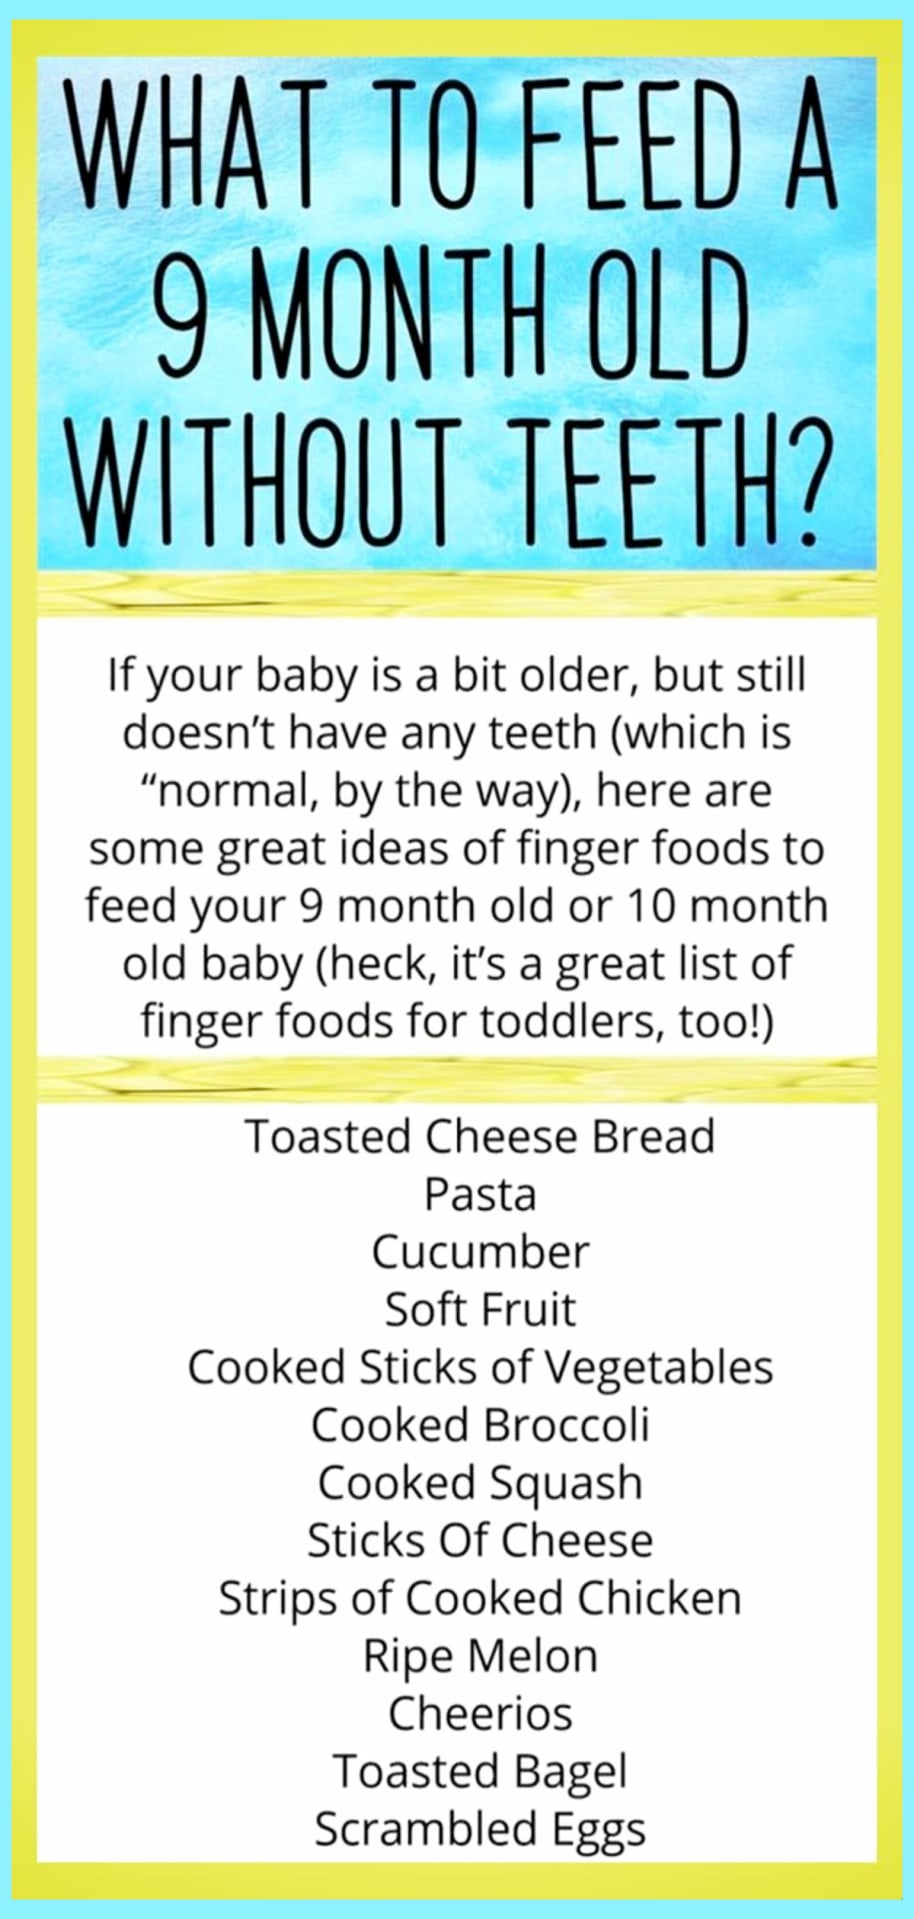 Baby Finger Food Ideas - Baby Finger Food Recipes and First Foods List for Baby with No Teeth and more fingers foods for baby by age